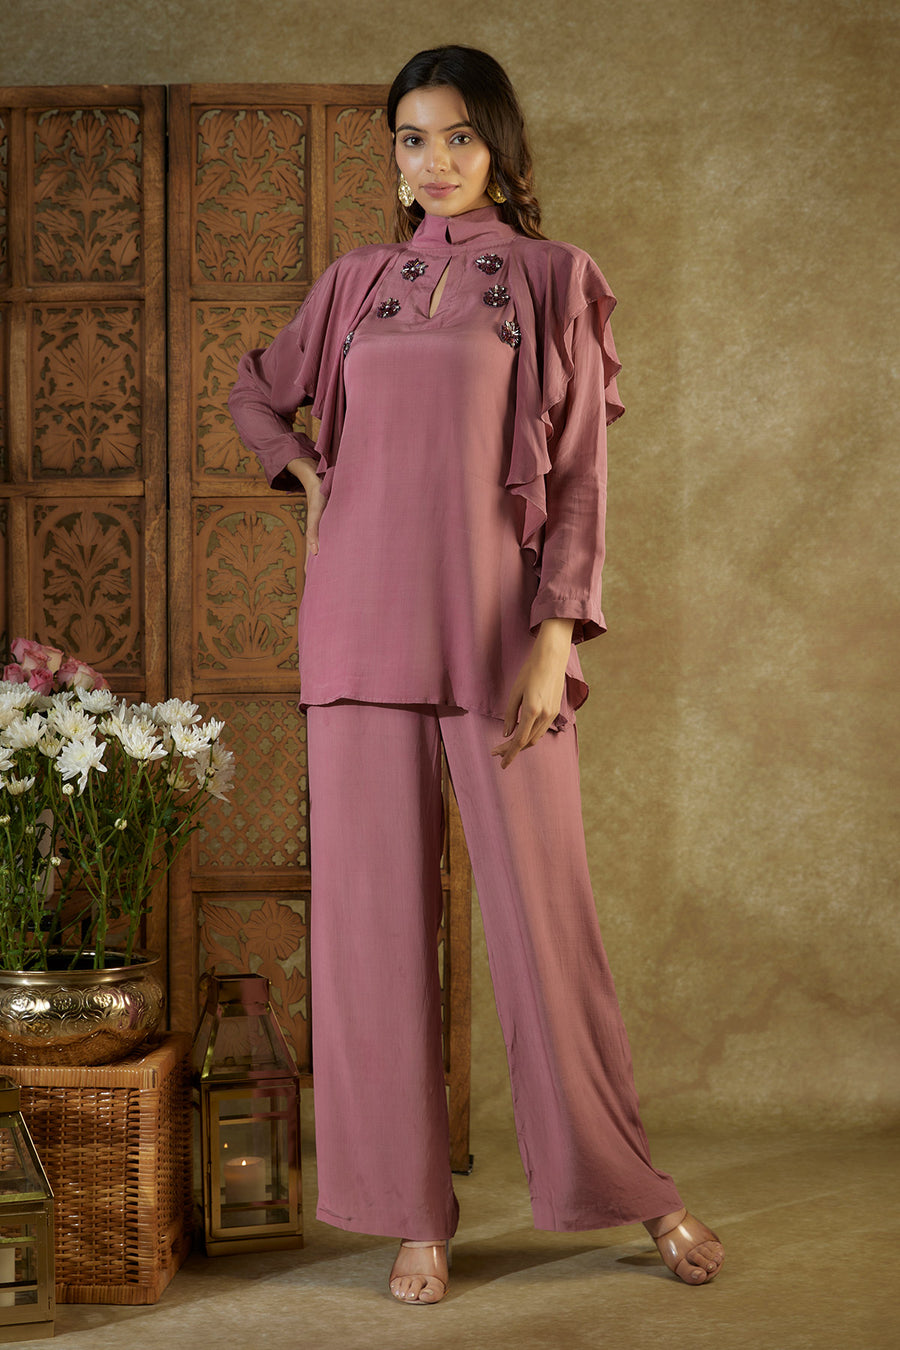 Rose pink ruffle top and pants co ord set with embroidery